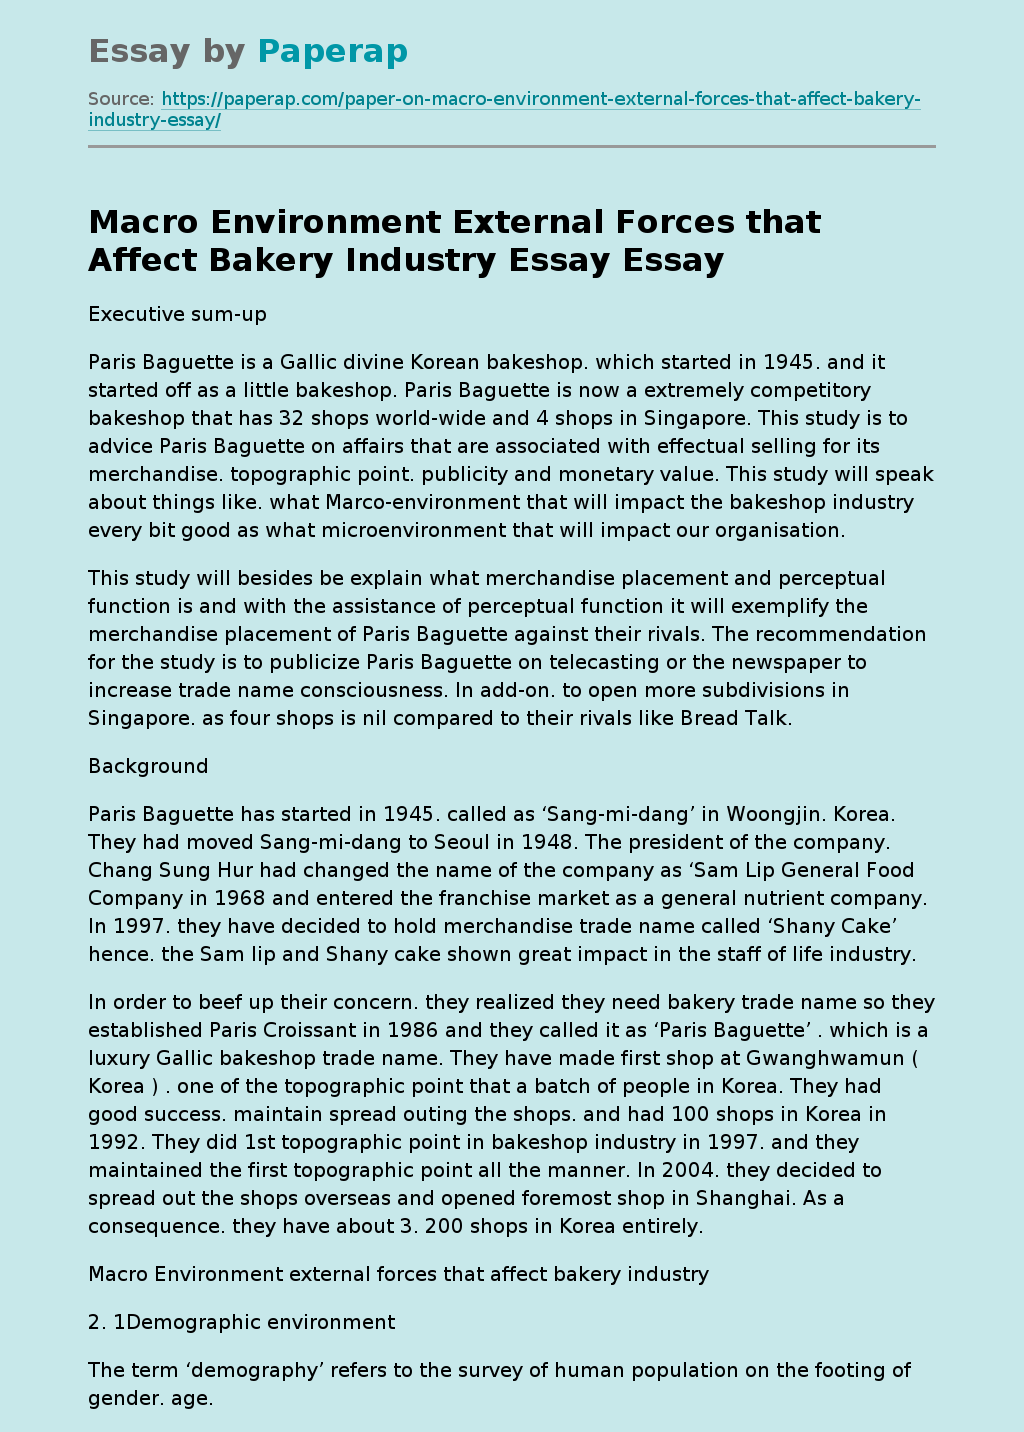 Macro Environment External Forces that Affect Bakery Industry Essay